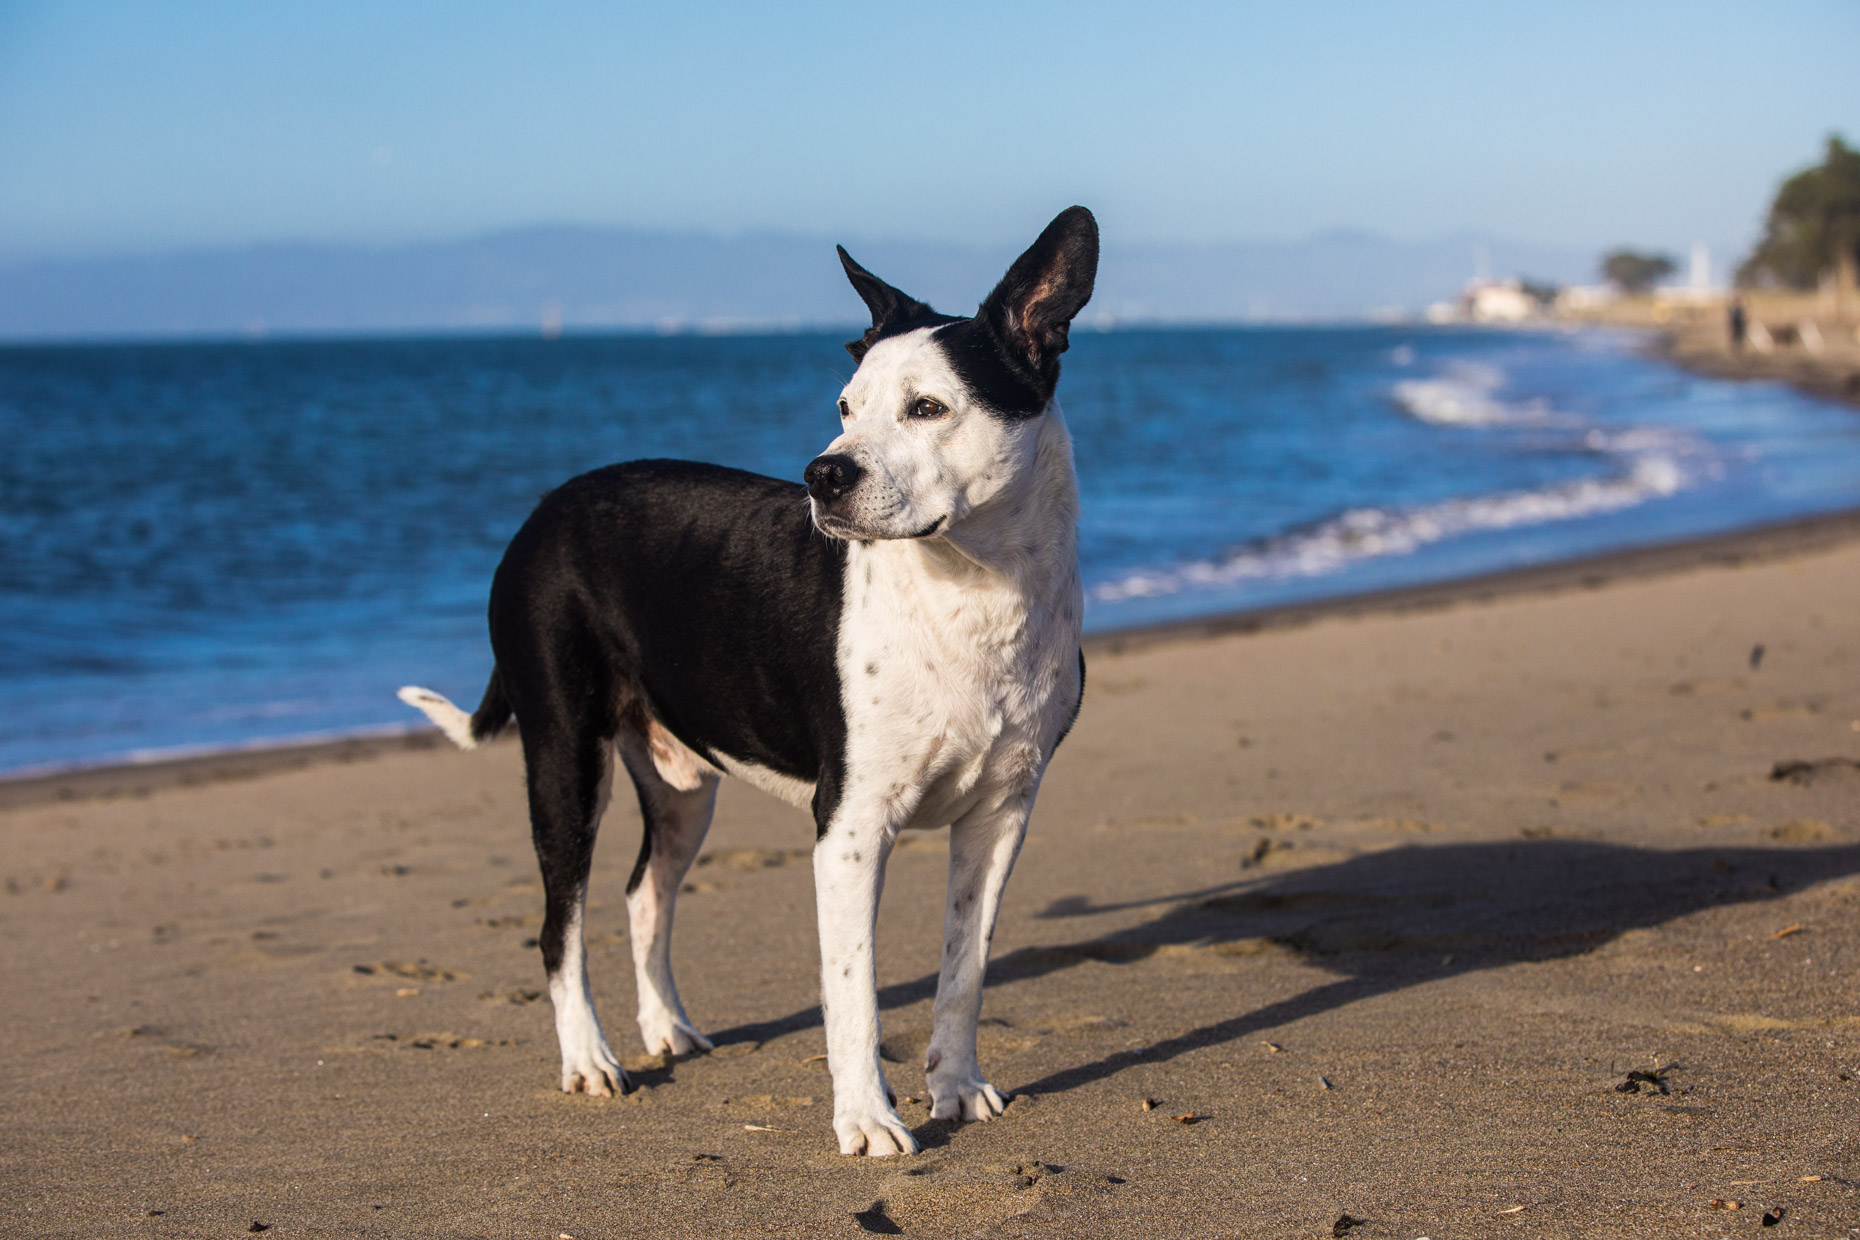 Dog Lifestyle Photography | Dog on Beach by Mark Rogers